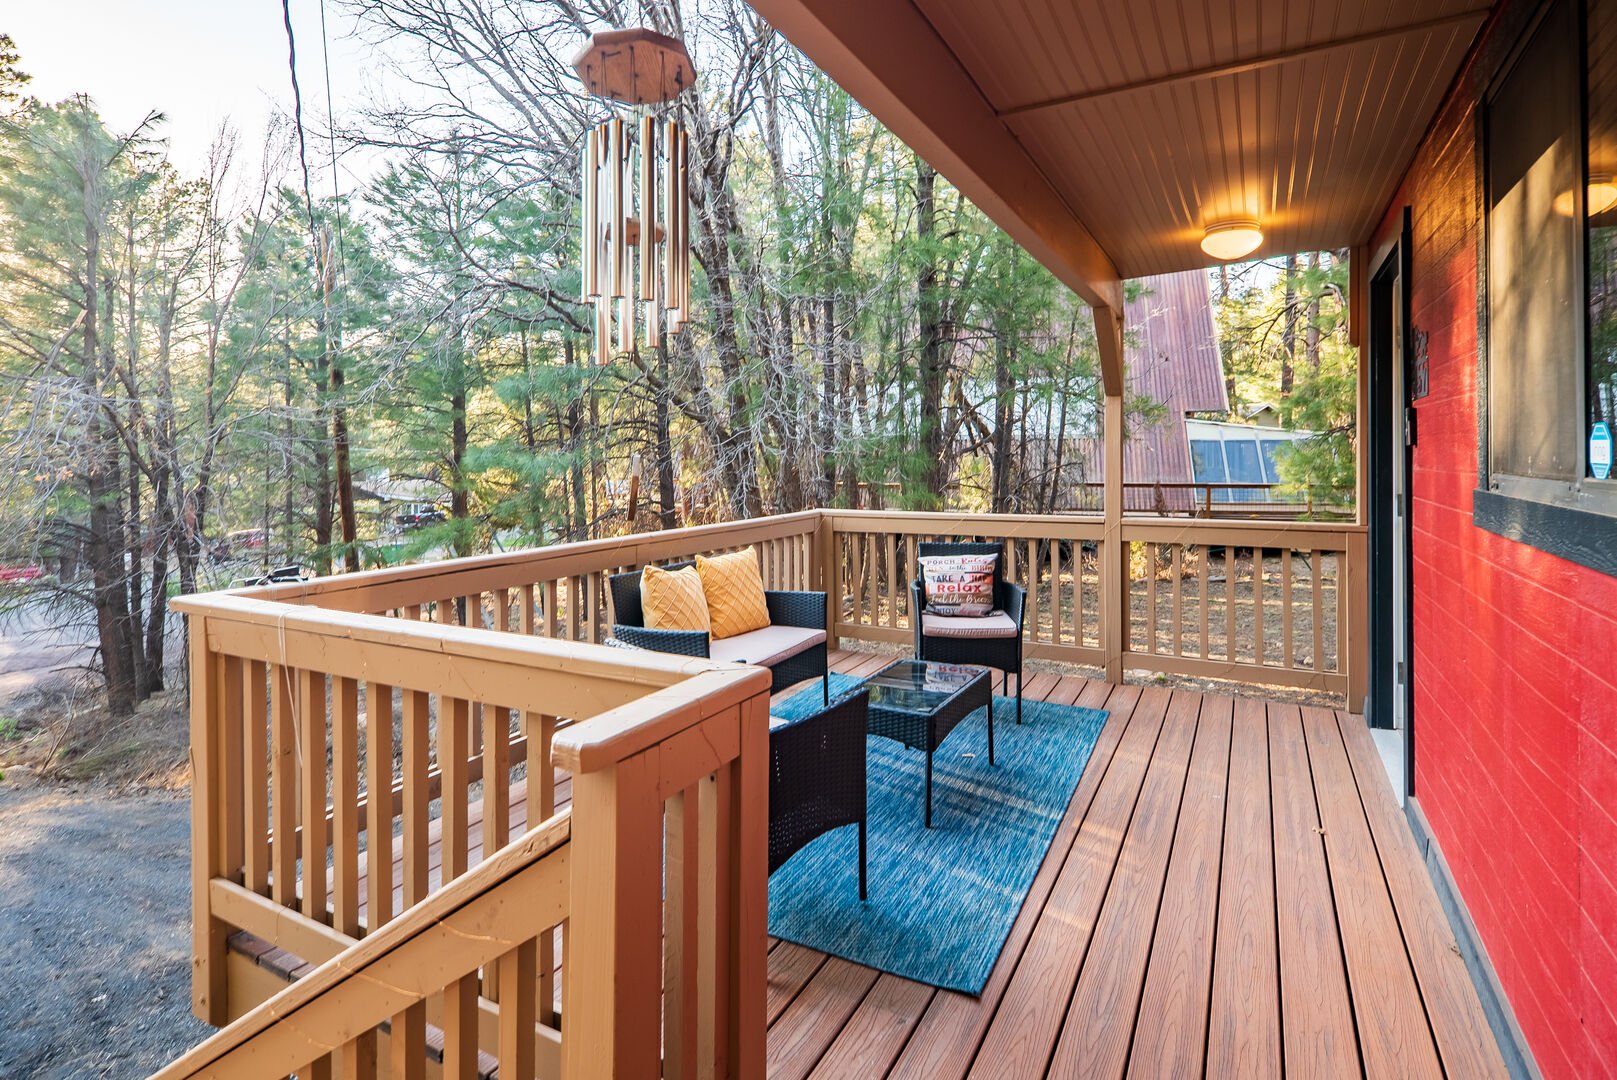 Relax and enjoy nature in the outdoor seating available on the front porch.